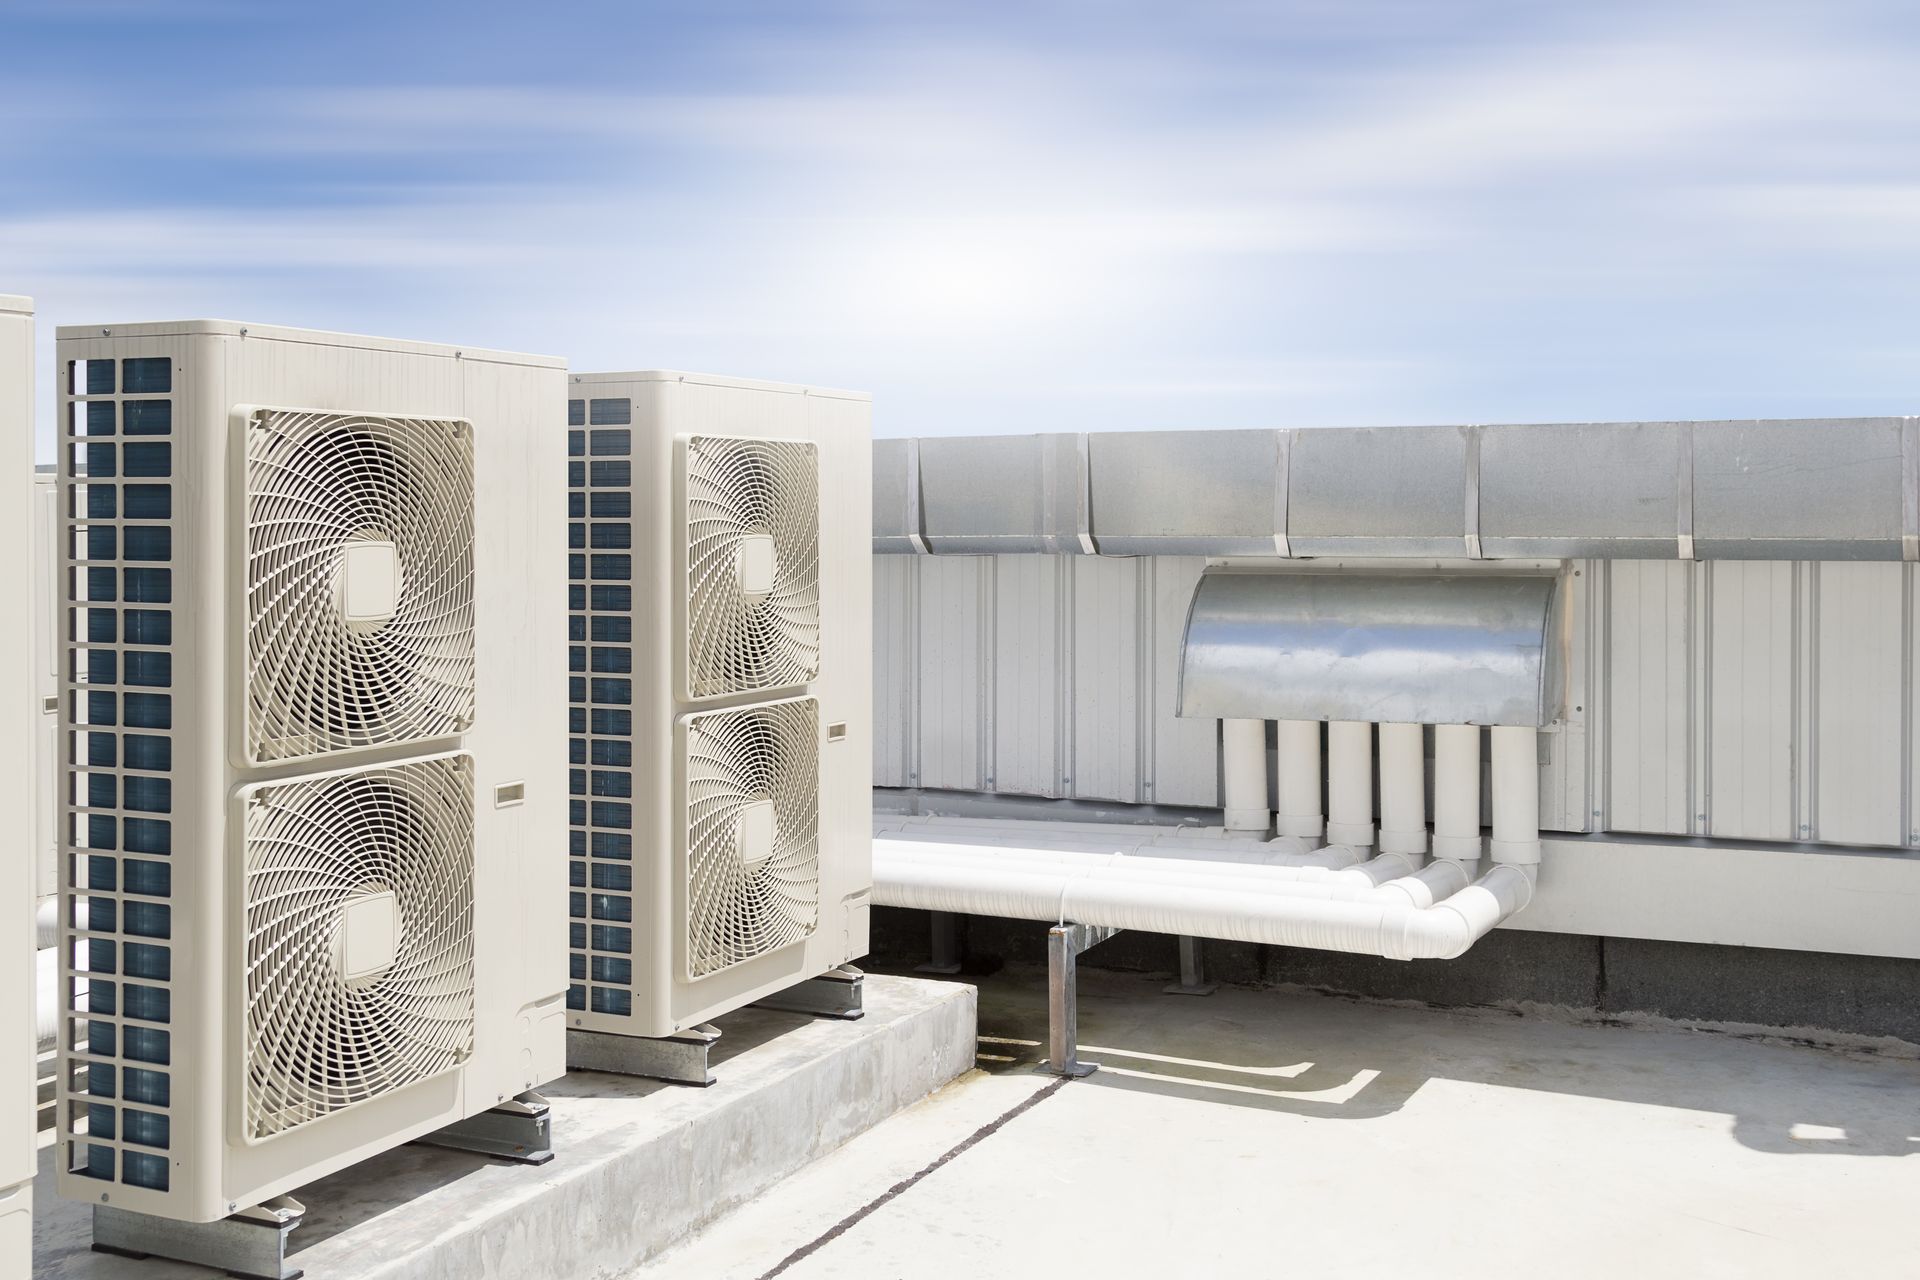 Condenser unit or compressor on roof of industrial plant building